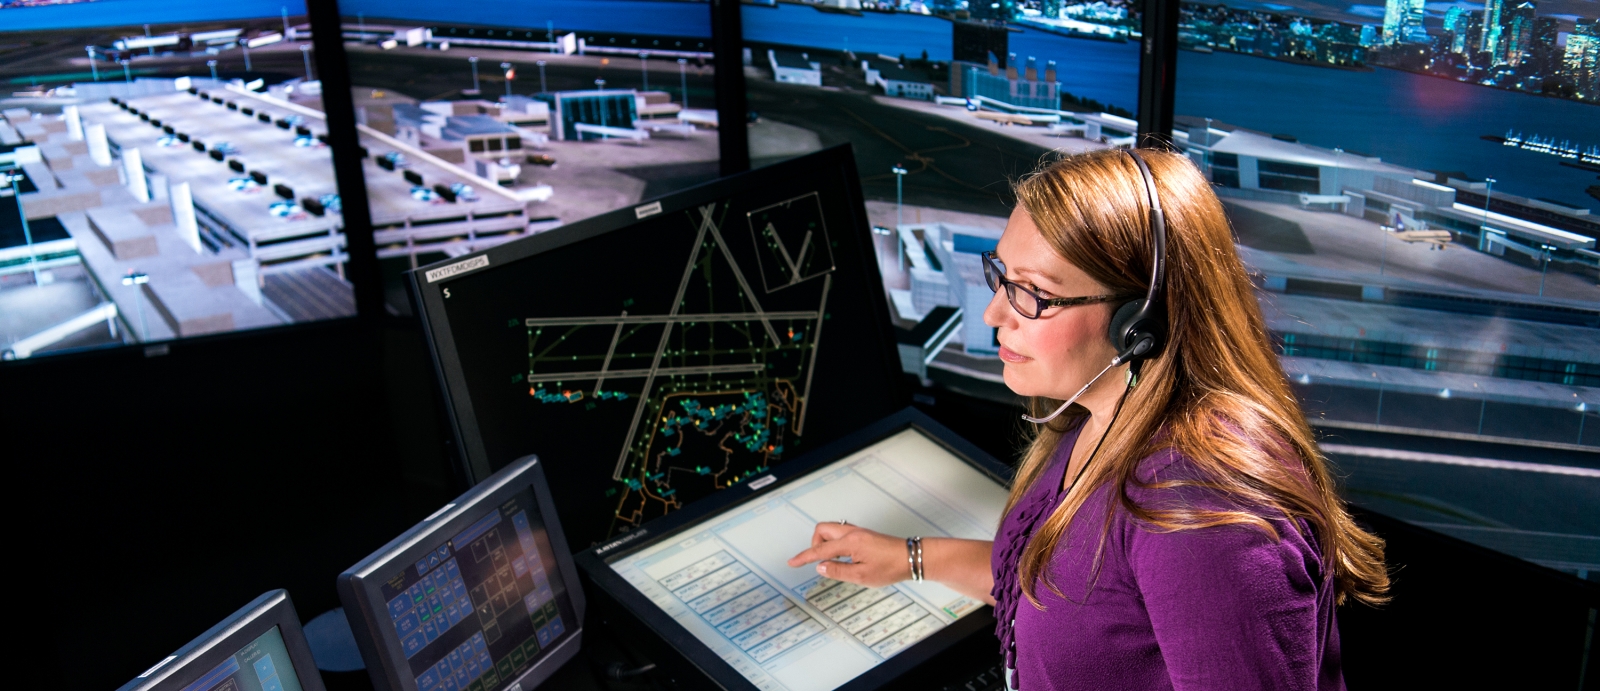 In the control tower simulation facility, an Air Traffic Control Systems staff member uses integrated electronic flight data and surveillance systems to direct an aircraft to taxi toward the runway. 